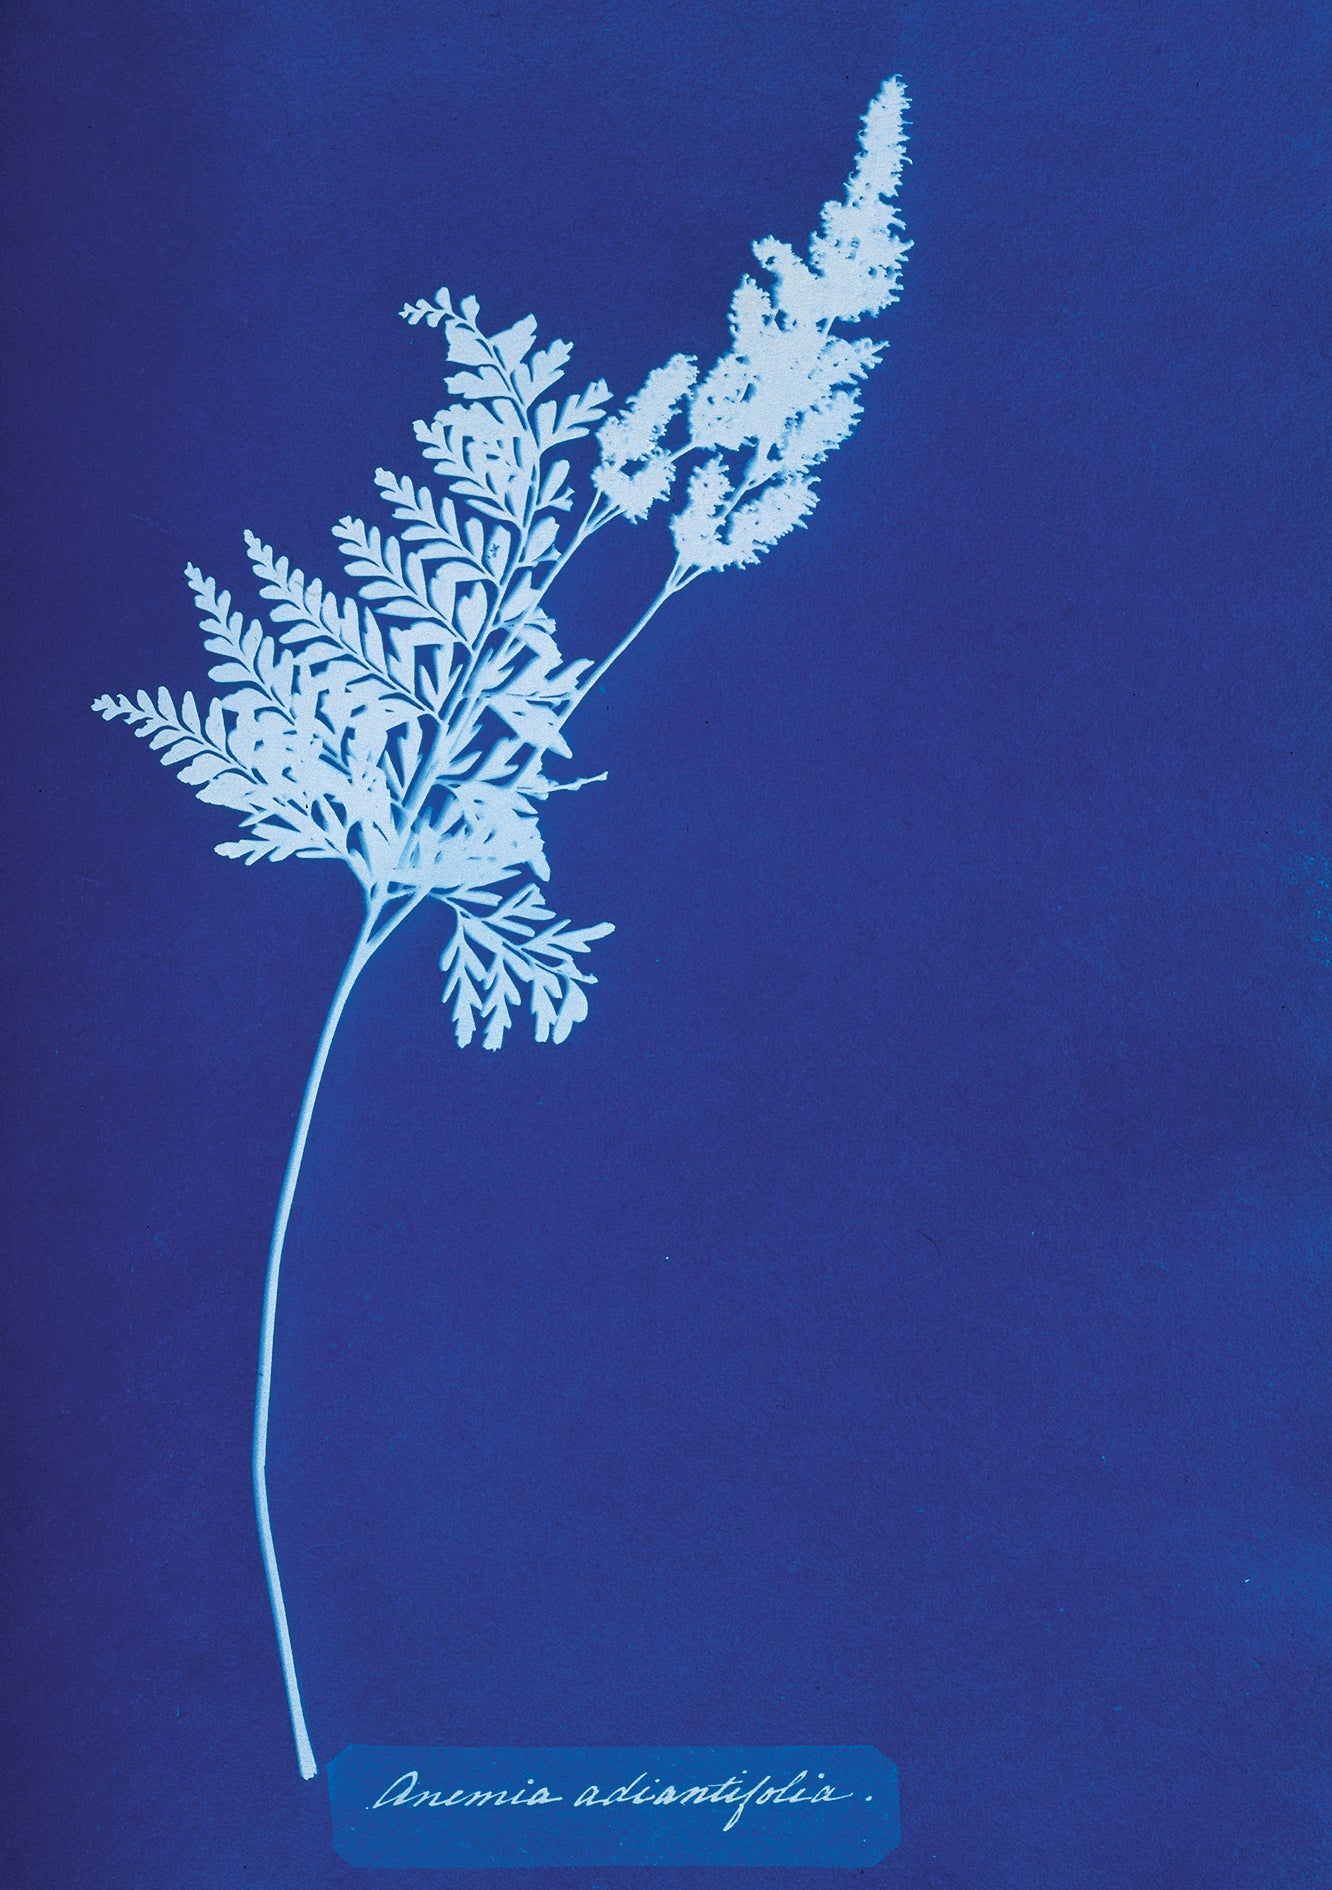 The cameraless images of Anna Atkins